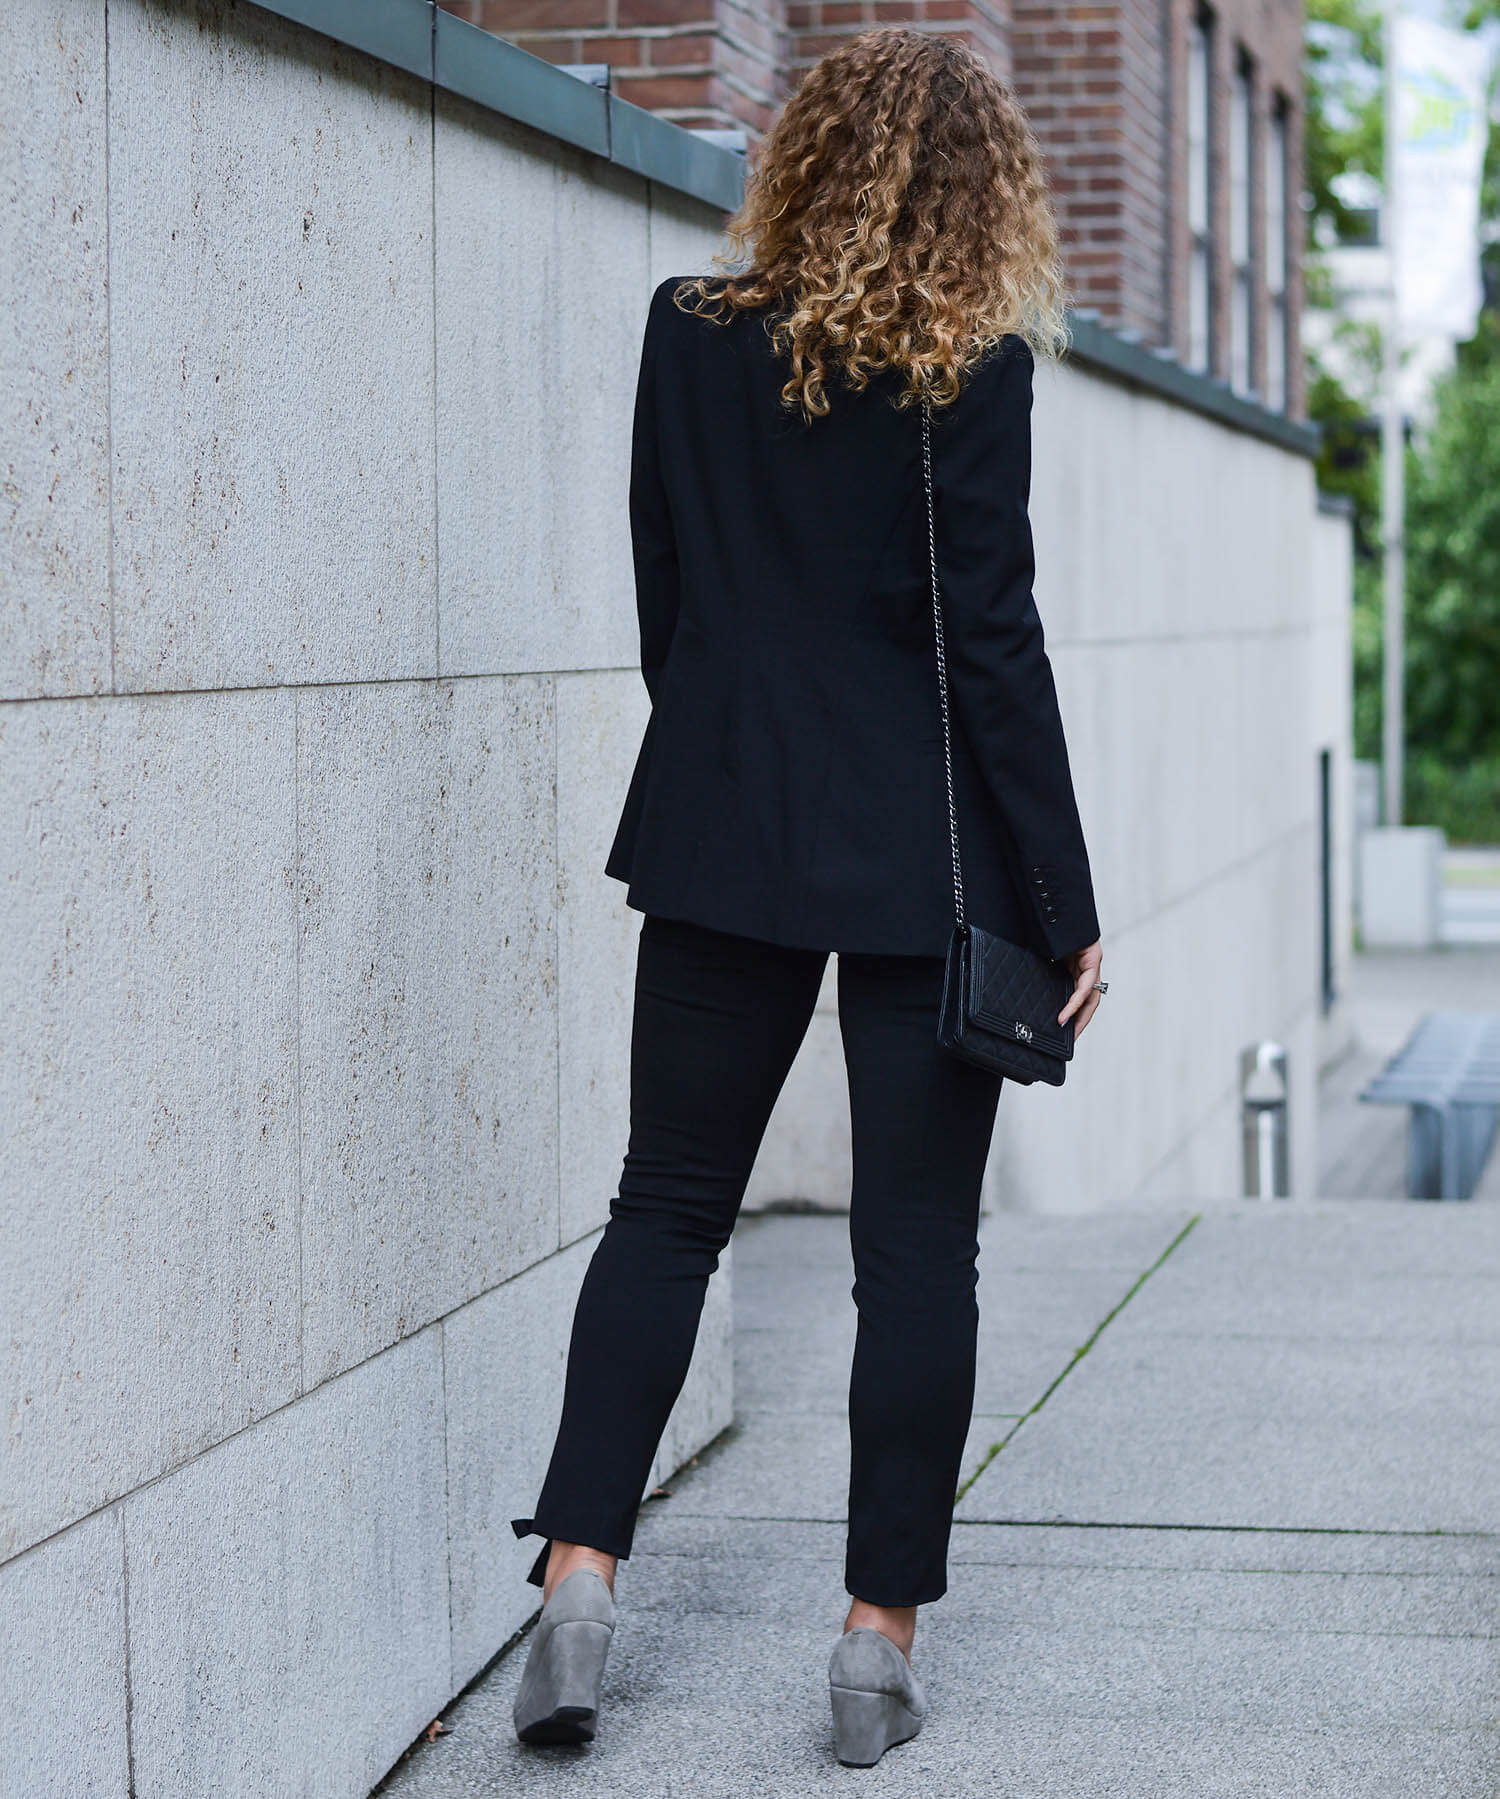 Kationette-fashionblog-nrw-Outfit-Black-and-White-Bow-Pants-Blazer-Lagerfeld-Shirt-streetstyle